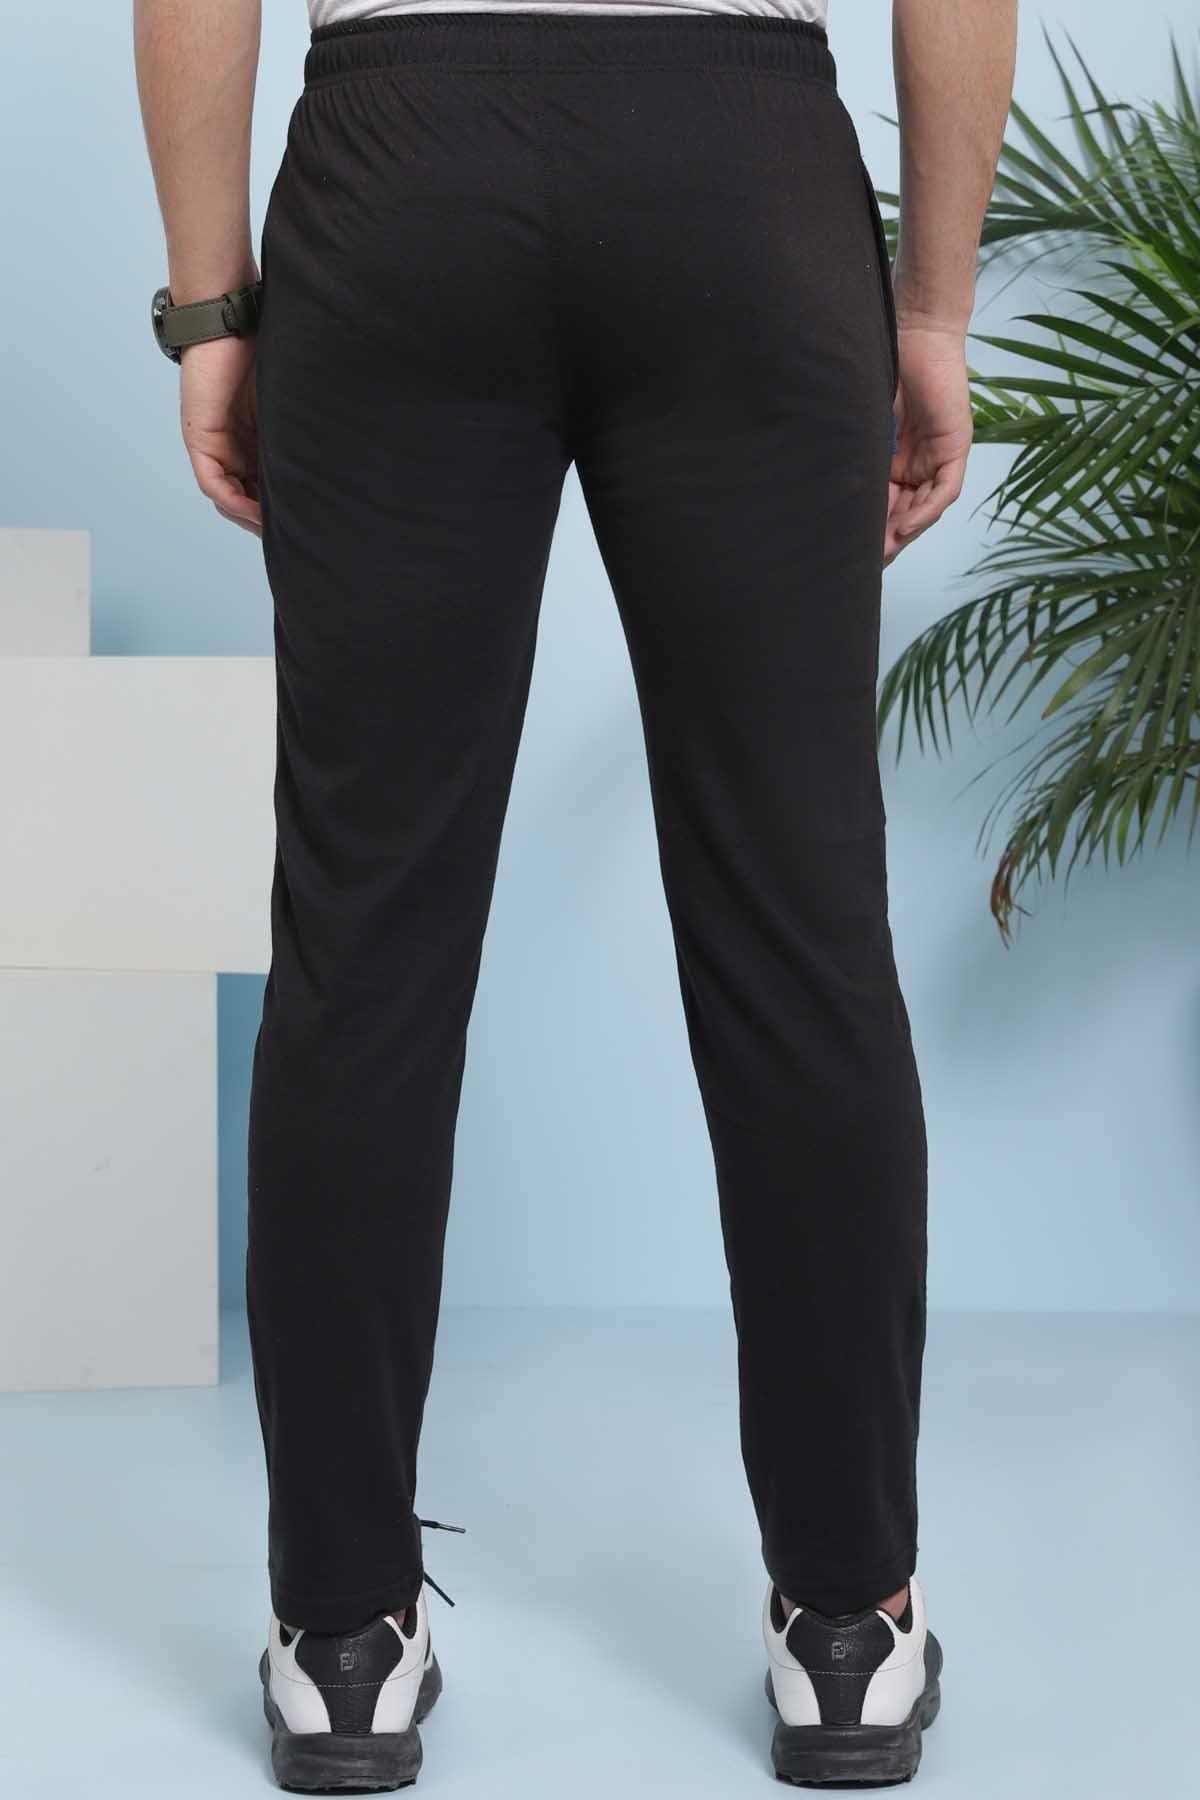 CASUAL TROUSER SLEEPWEAR BLACK at Charcoal Clothing